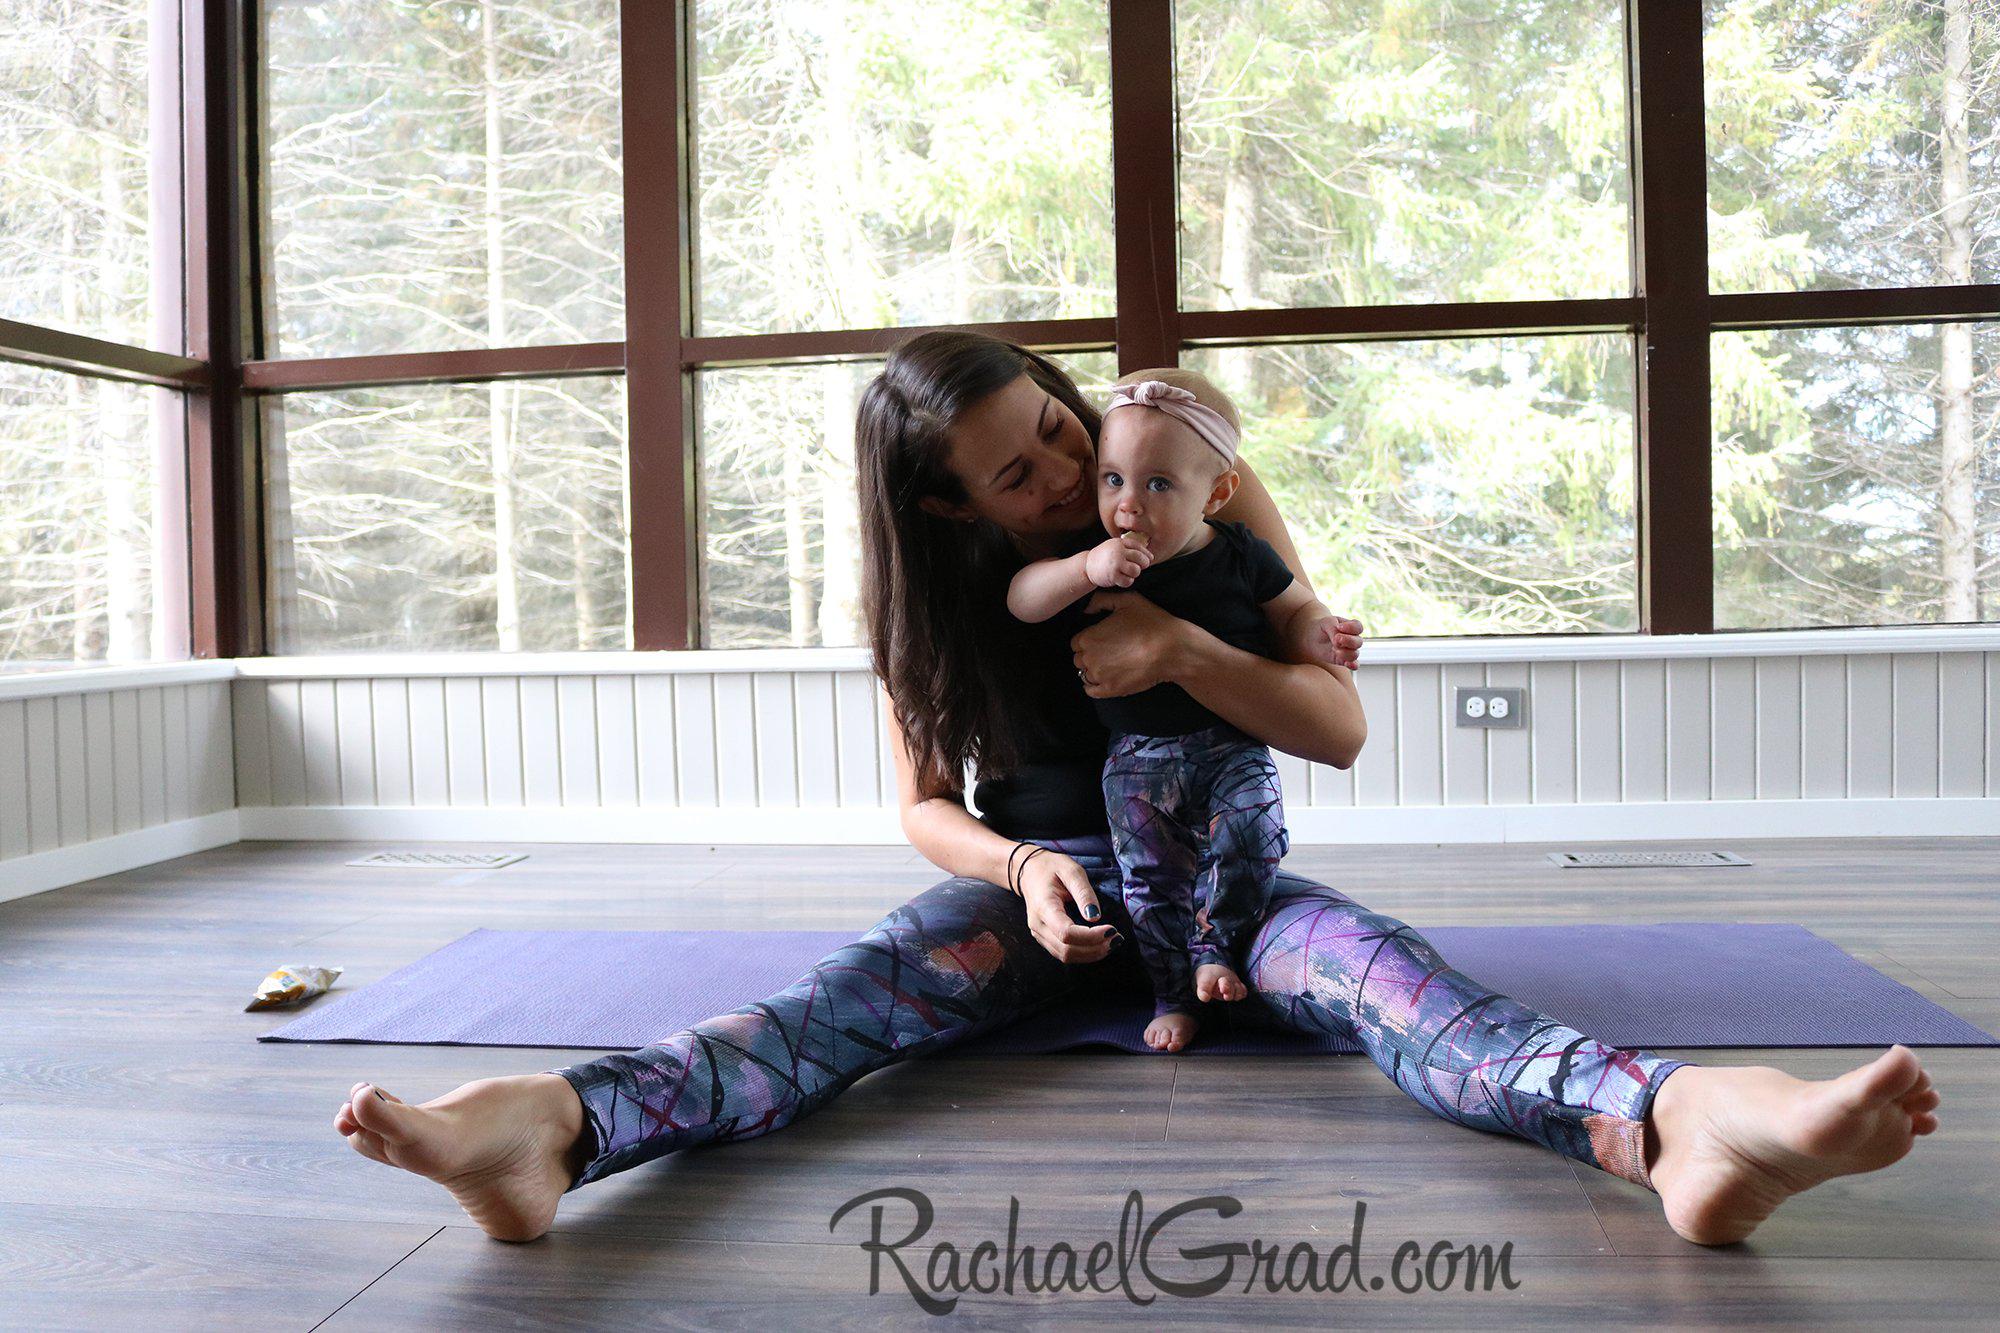 Mommy and Me Matching Leggings Multicolor Art by Artist Rachael Grad